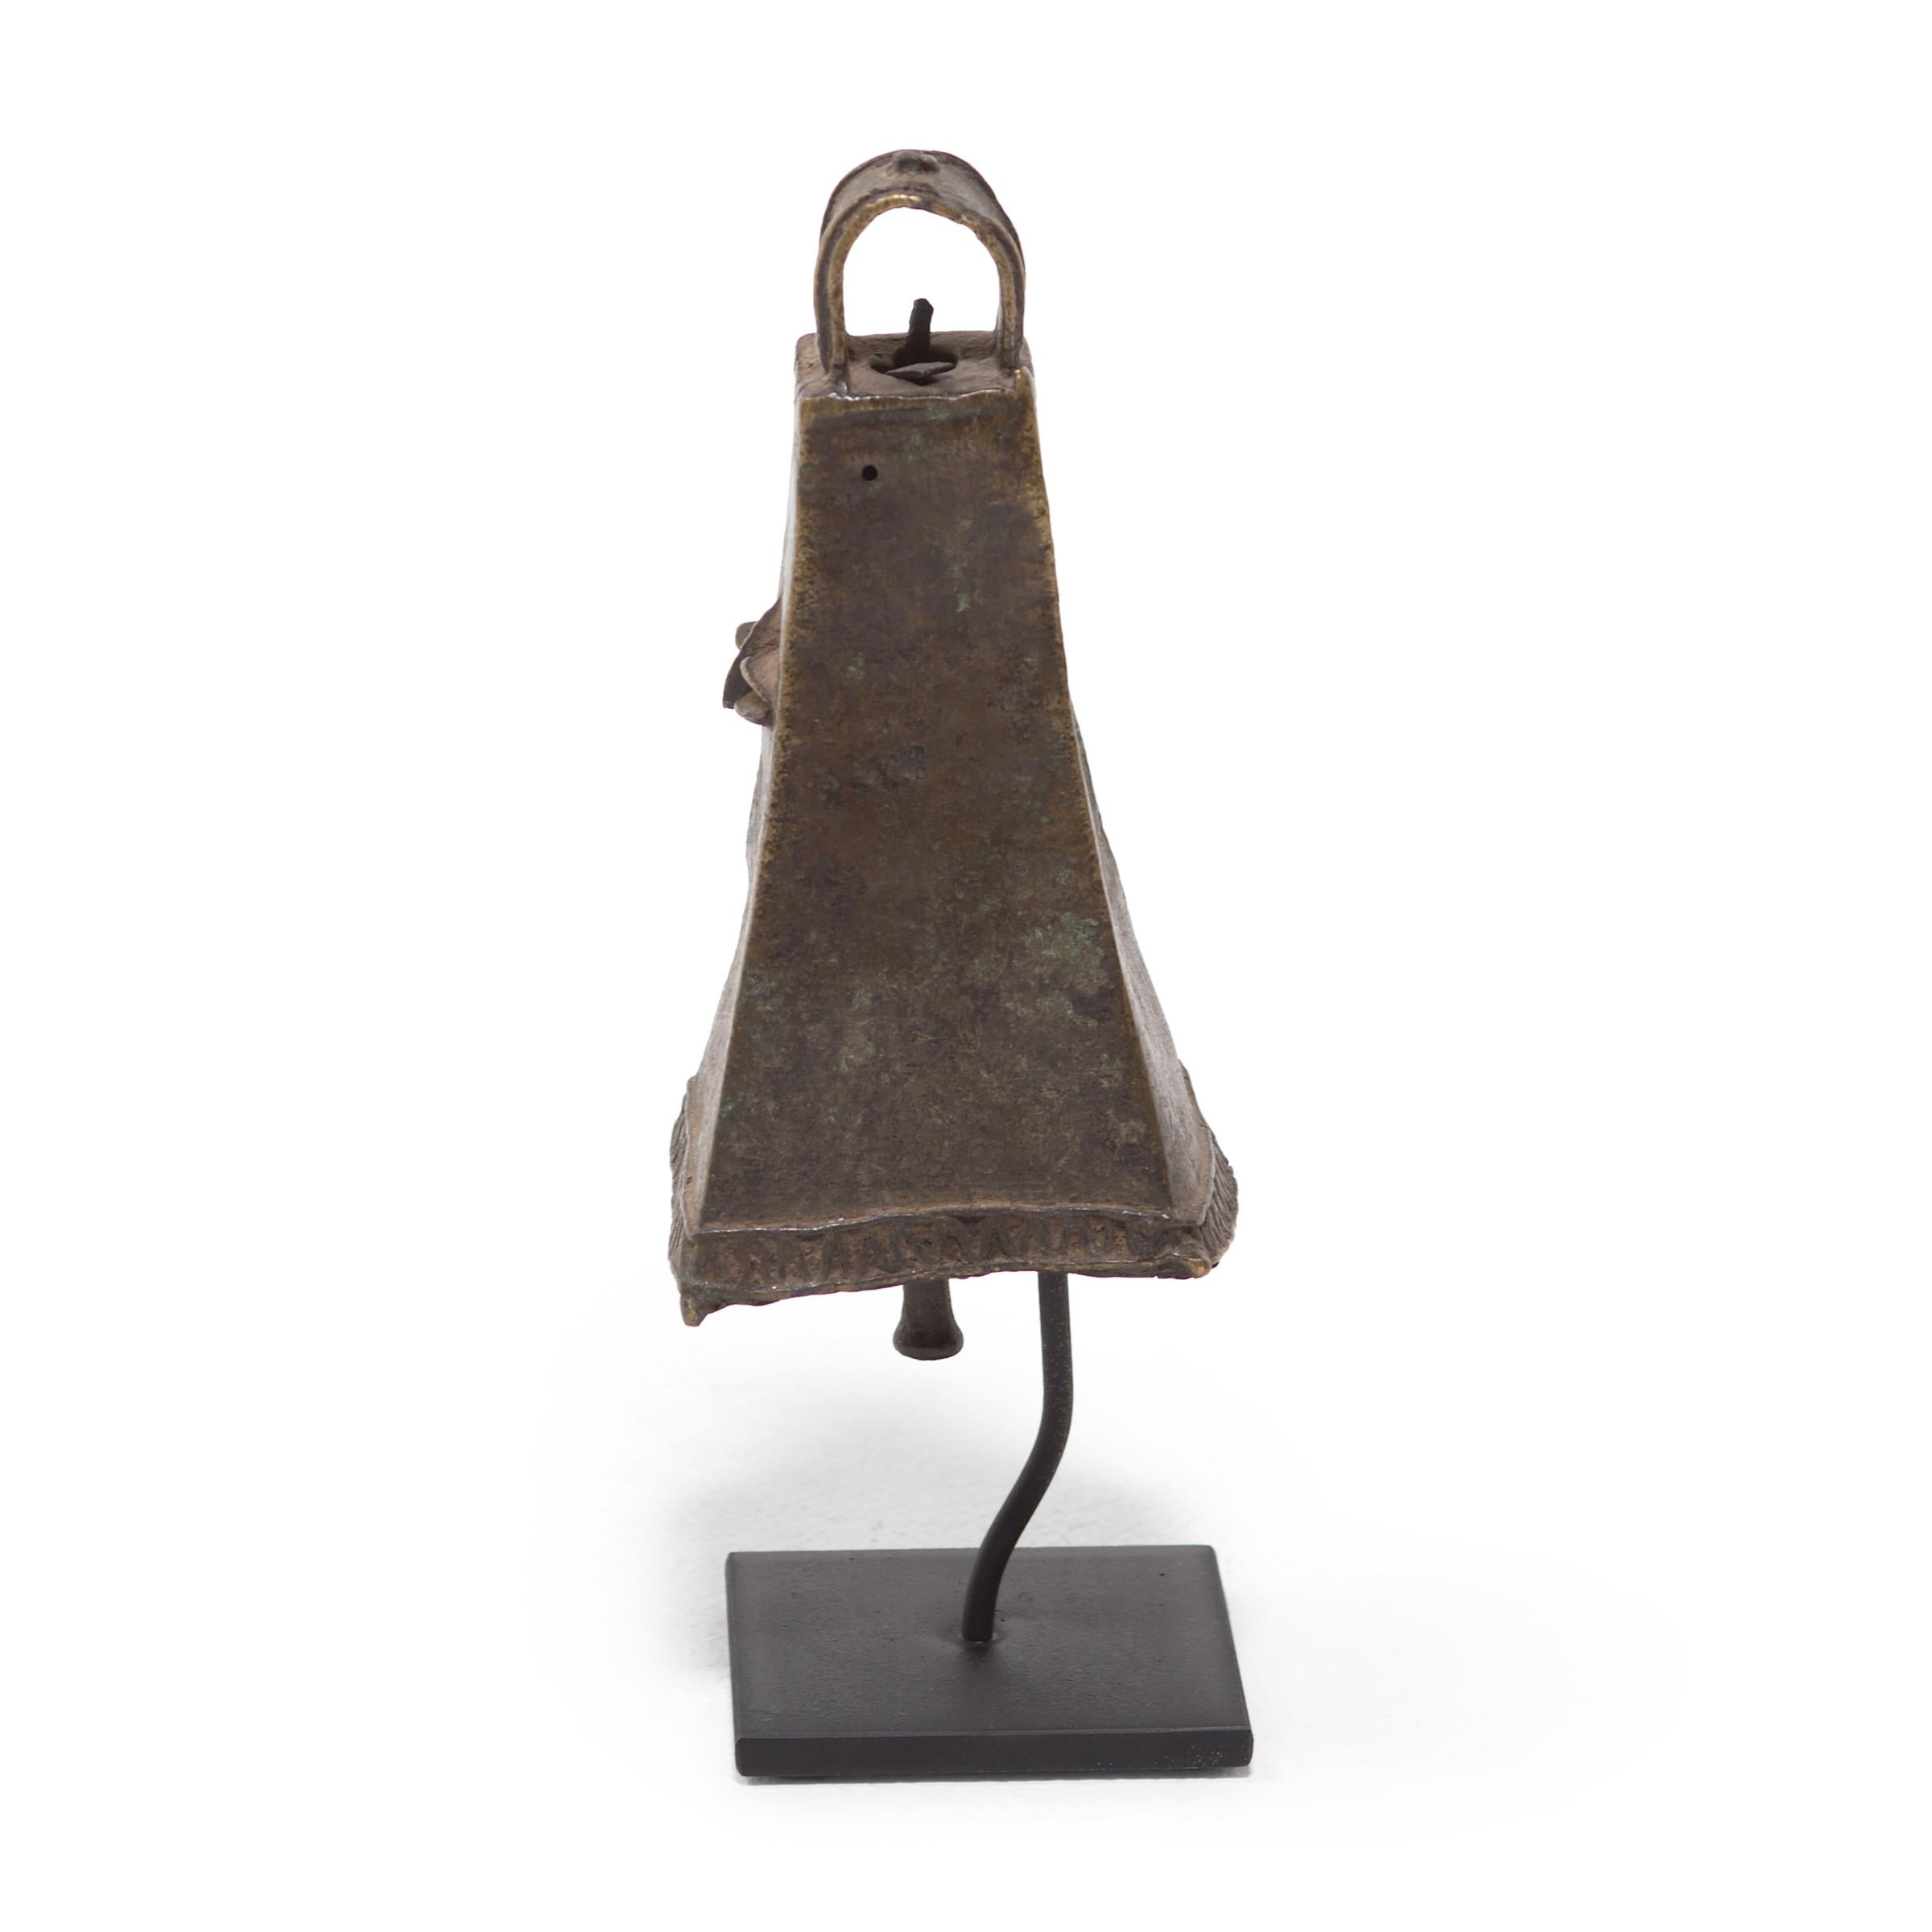 This four-sided brass face bell, known as omo, was created by an artisan of the Ijebu Yoruba People of Southern Nigeria. A mark of the wearer's rank and power, the bell would have been displayed by a prominent chief, worn at the left hip by a long